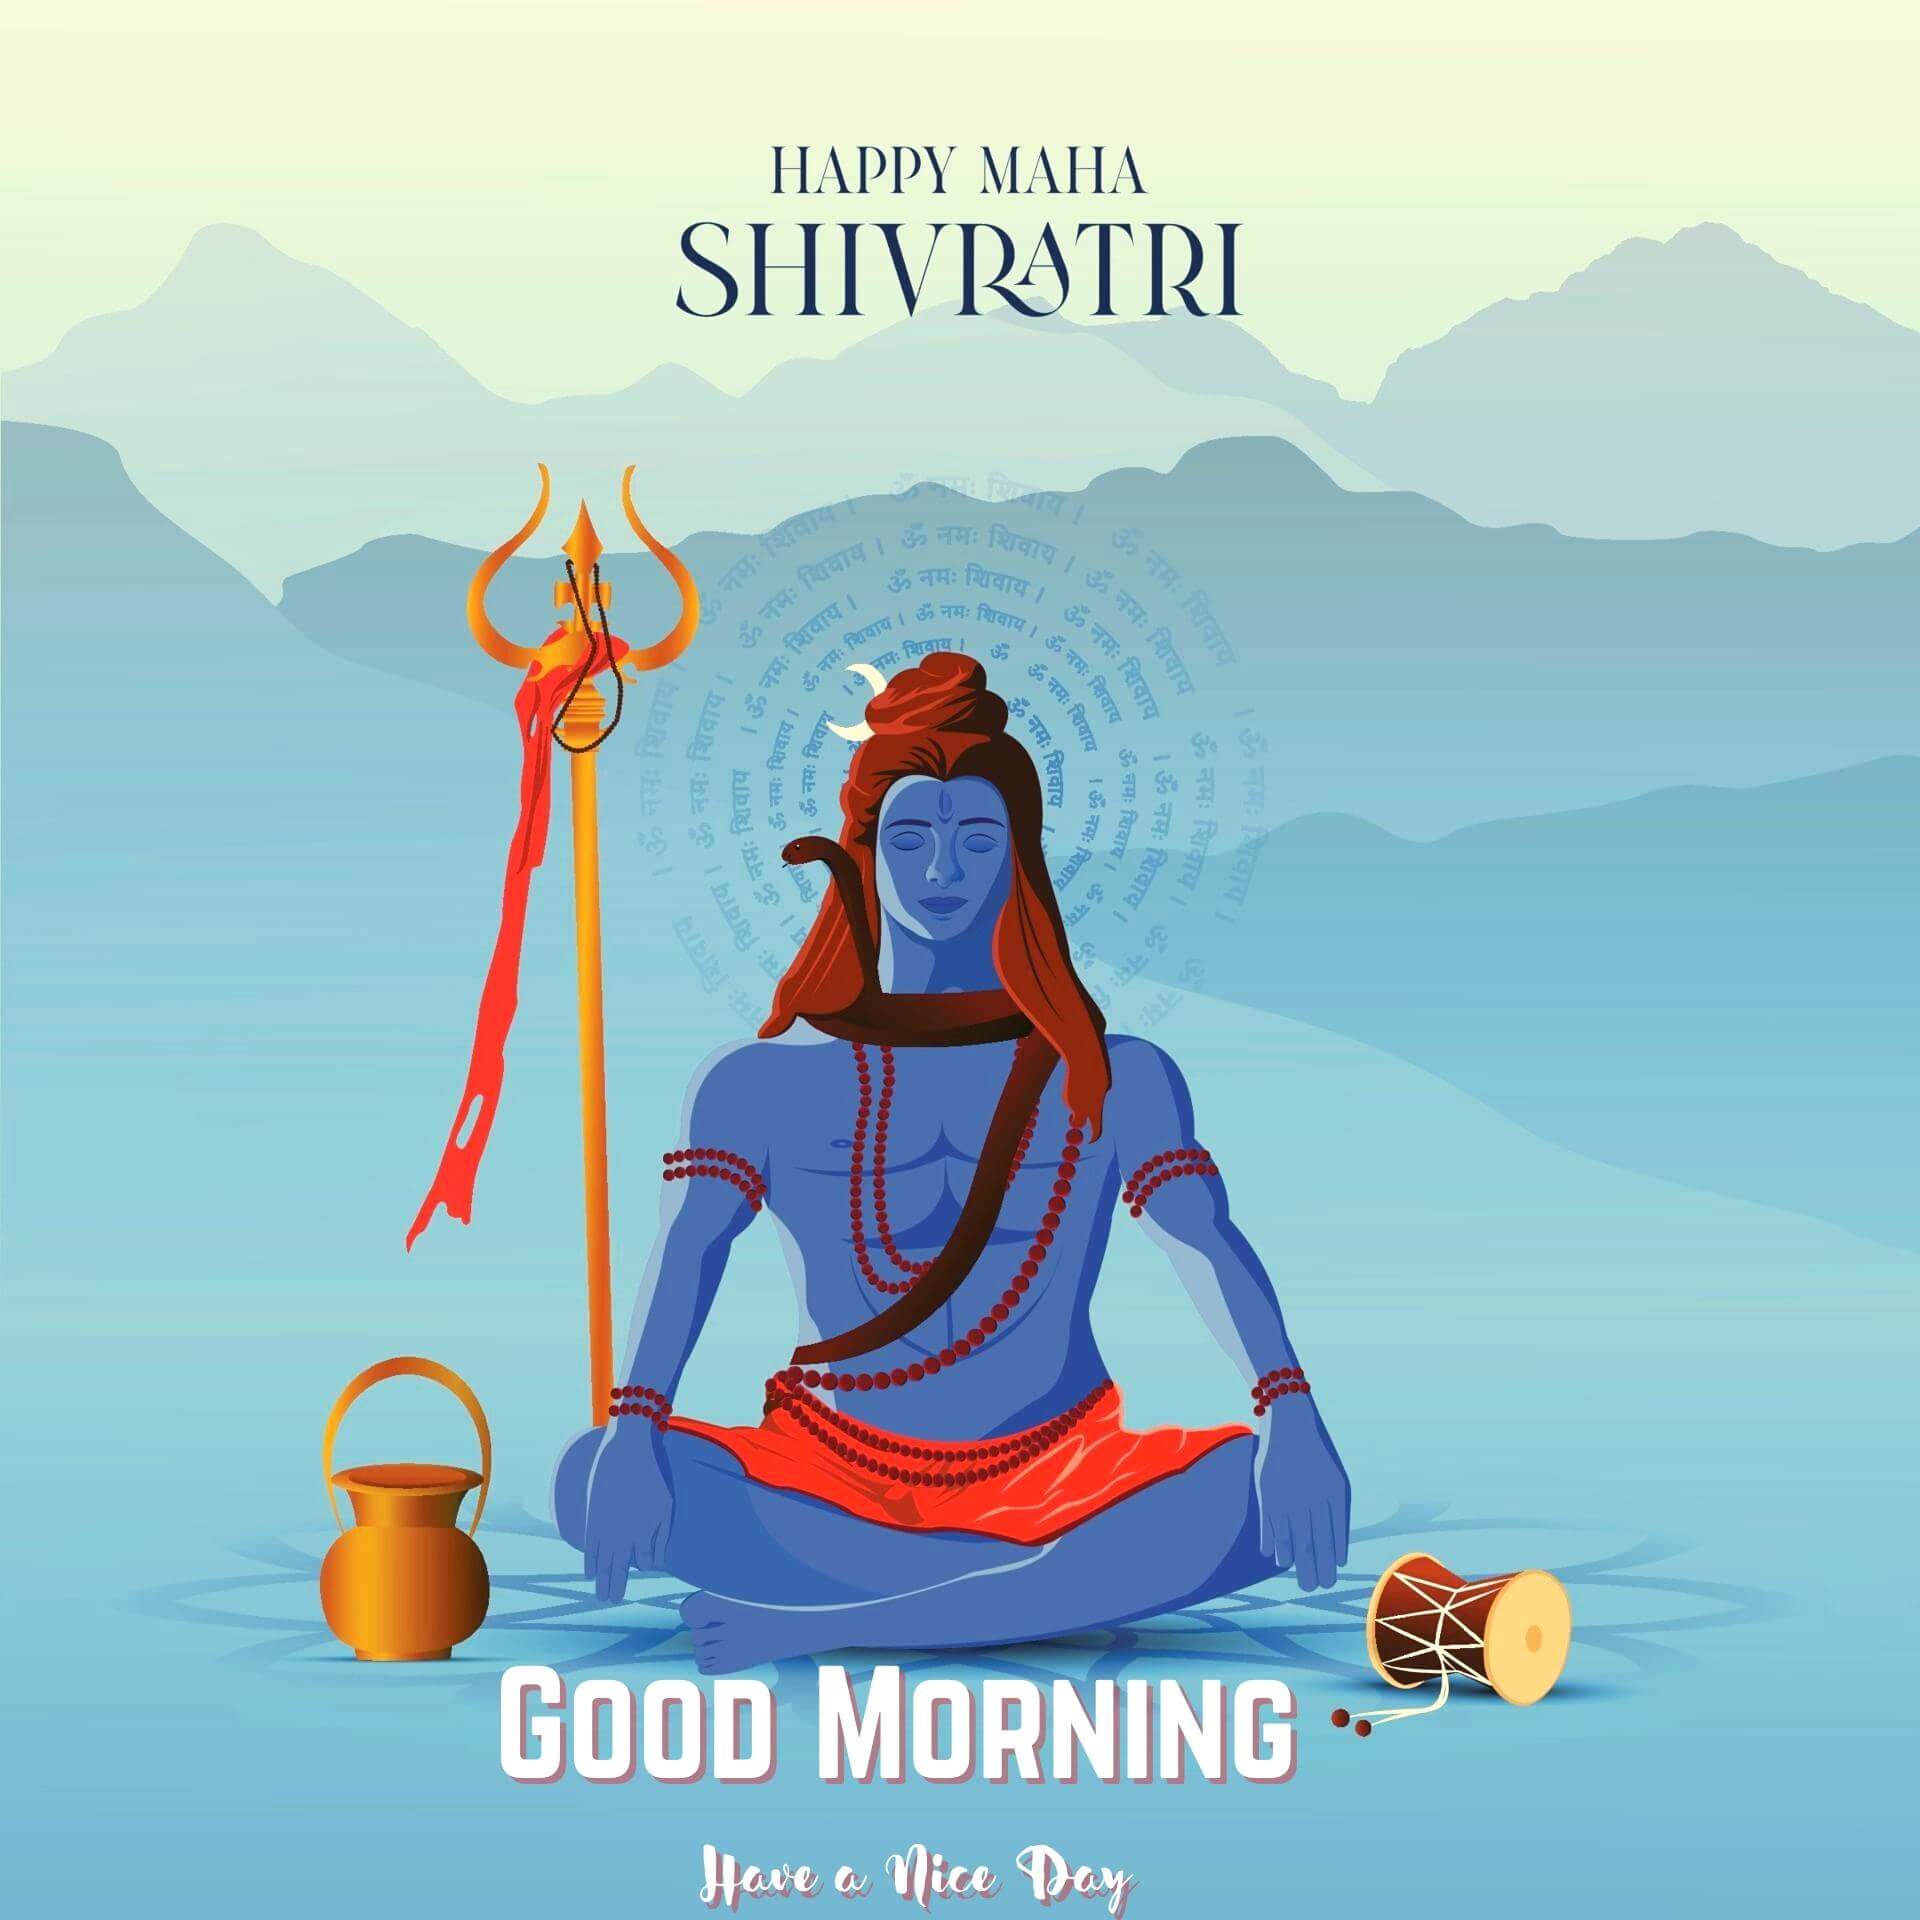 Shiva Good Morning Pics New Download for Facebook